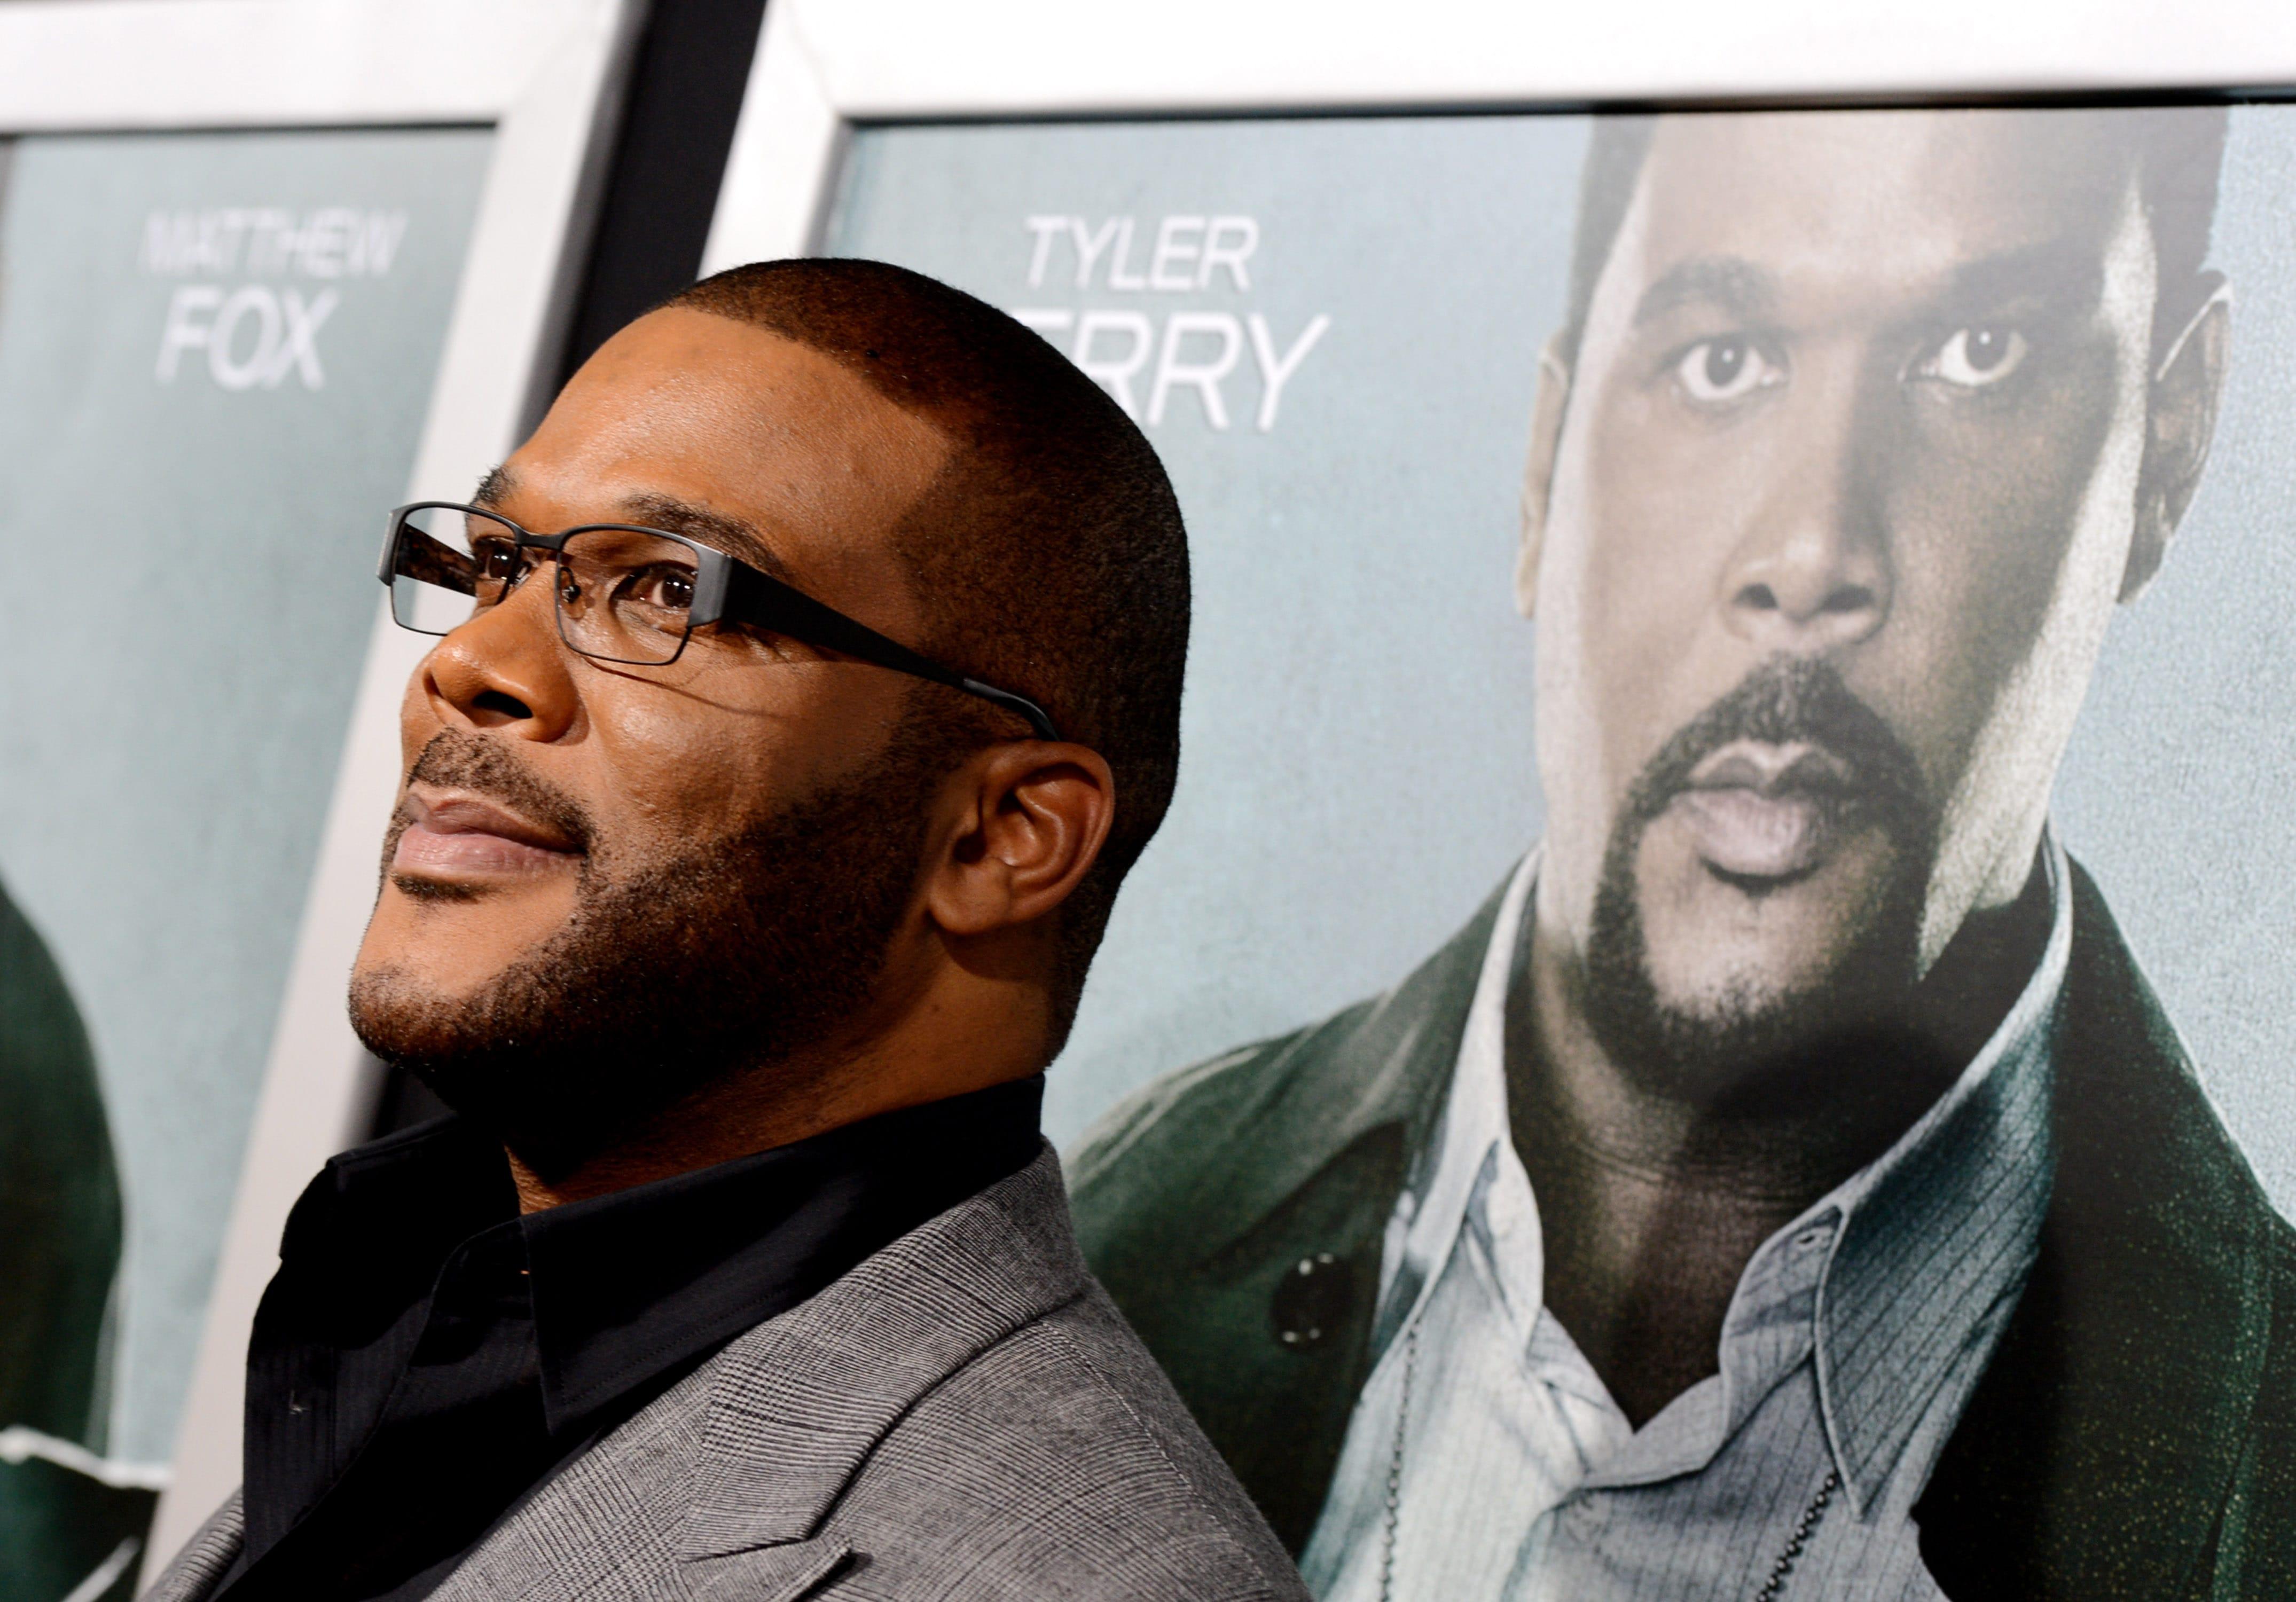 Tyler Perry Actor Wide Wallpapers 61165 4299x3000 px ~ HDWallSource